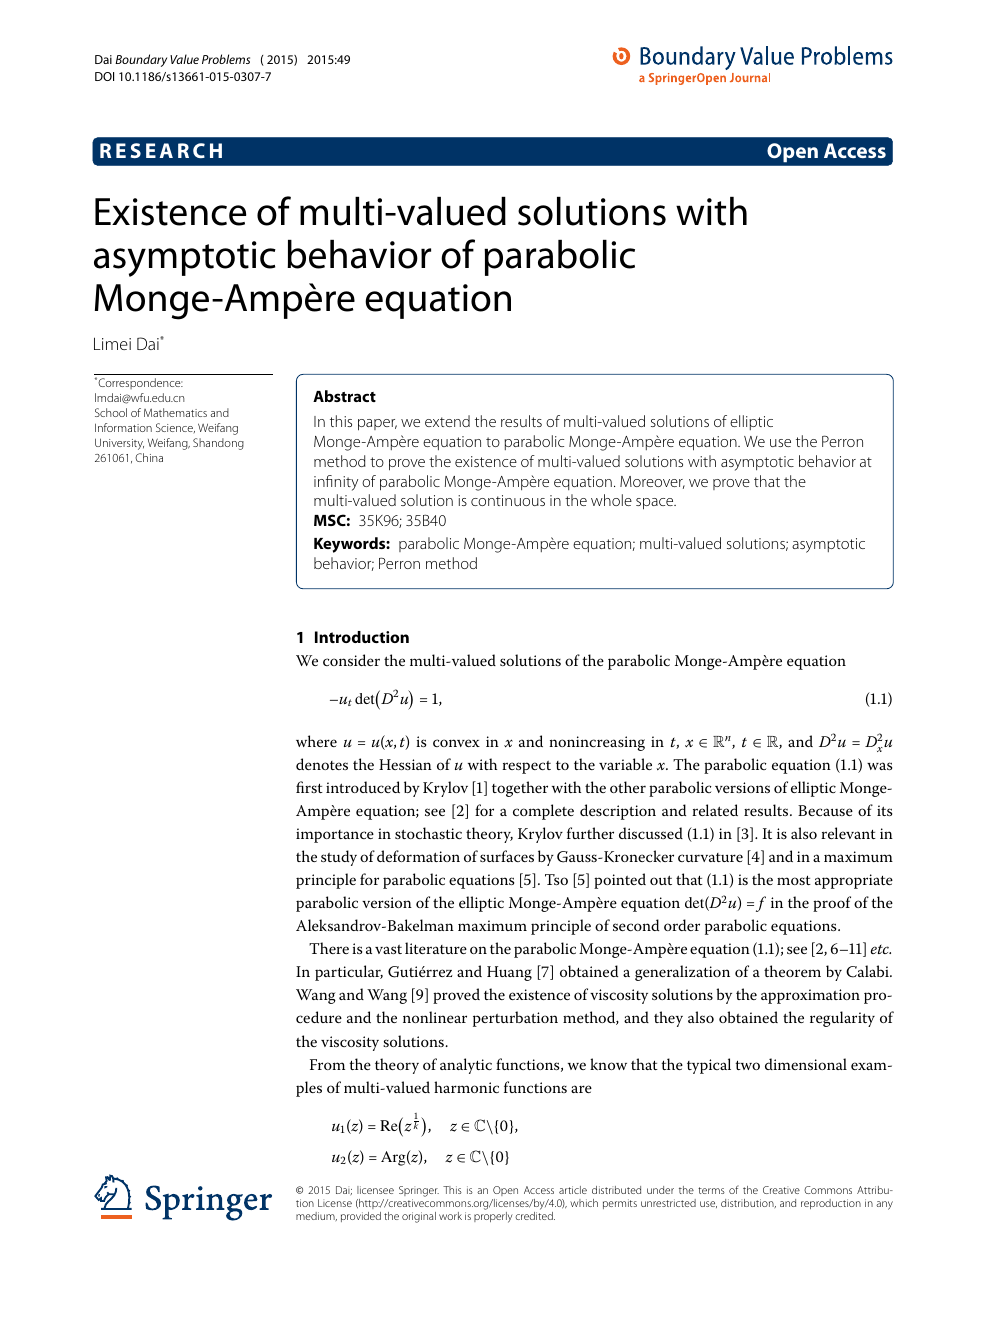 Existence Of Multi Valued Solutions With Asymptotic Behavior Of Parabolic Monge Ampere Equation Topic Of Research Paper In Mathematics Download Scholarly Article Pdf And Read For Free On Cyberleninka Open Science Hub